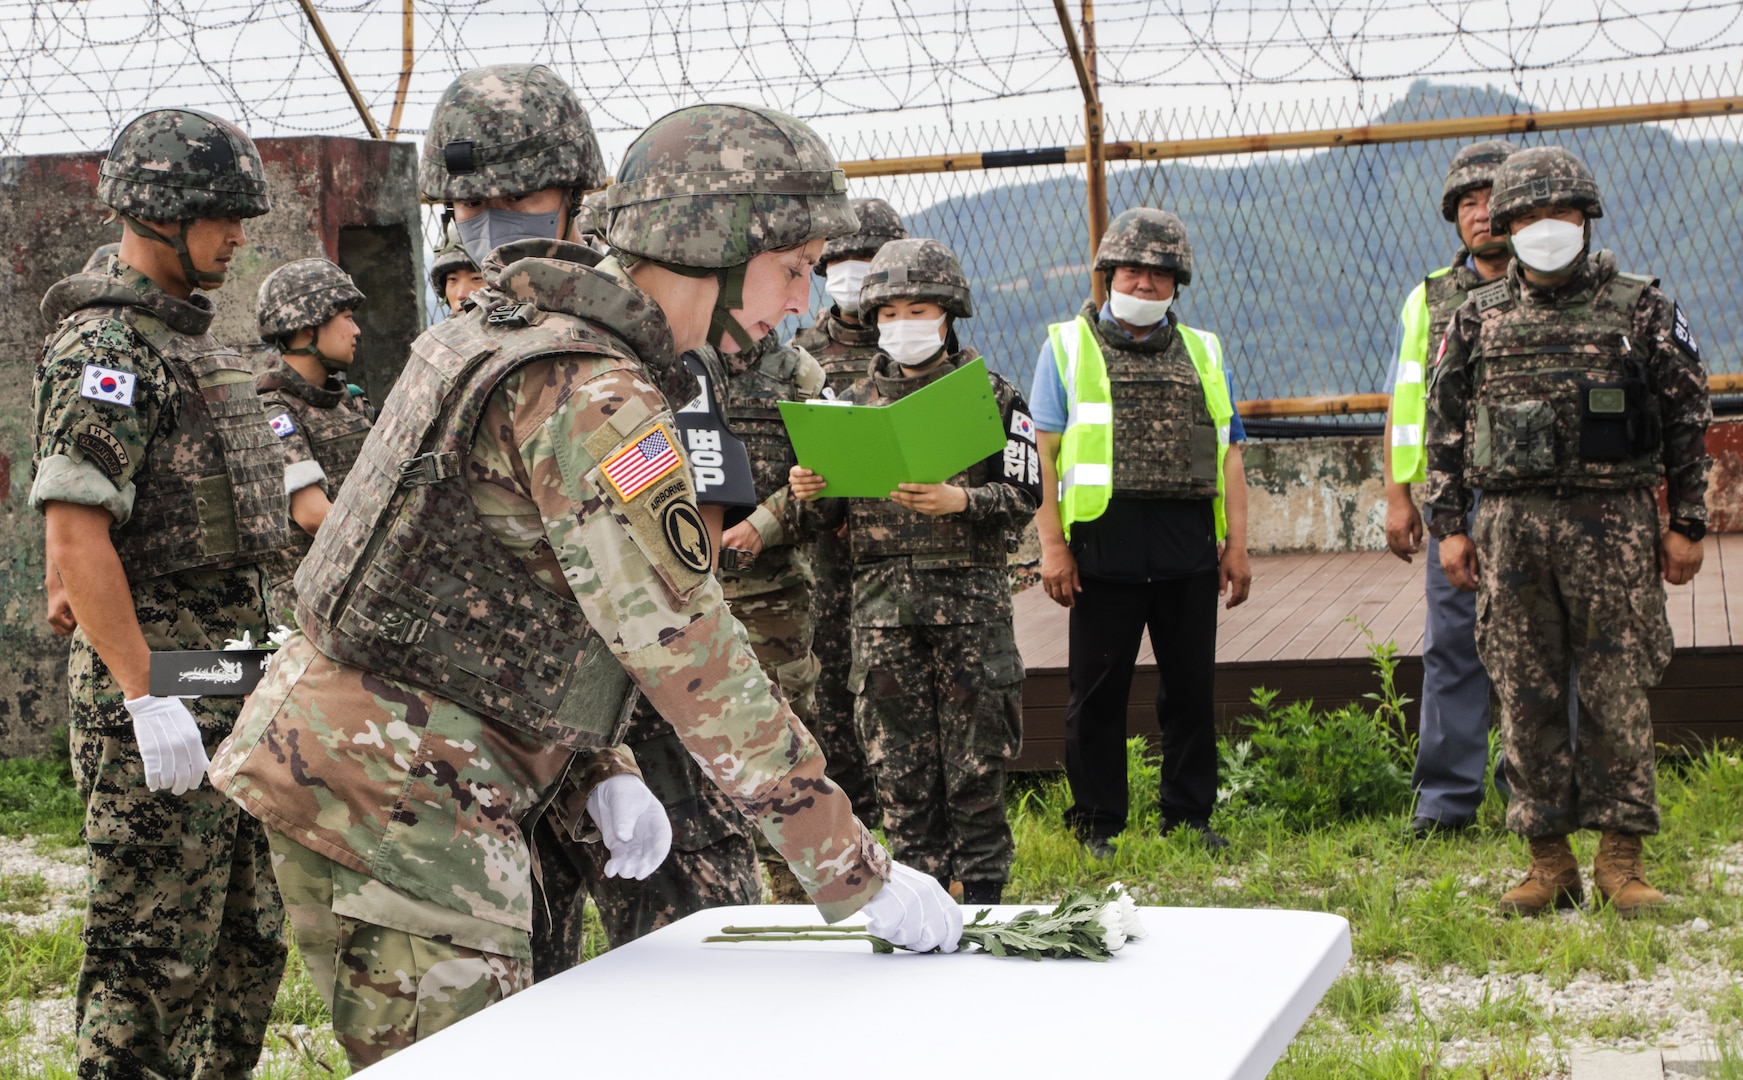 Command Sgt. Maj. JoAnn Naumann, command senior enlisted leader with Special Operations Command Korea, places a flower in honor of the fallen Soldier who gave their life defending Arrow Head Ridge 281, at South Korea, June 22, 2022.